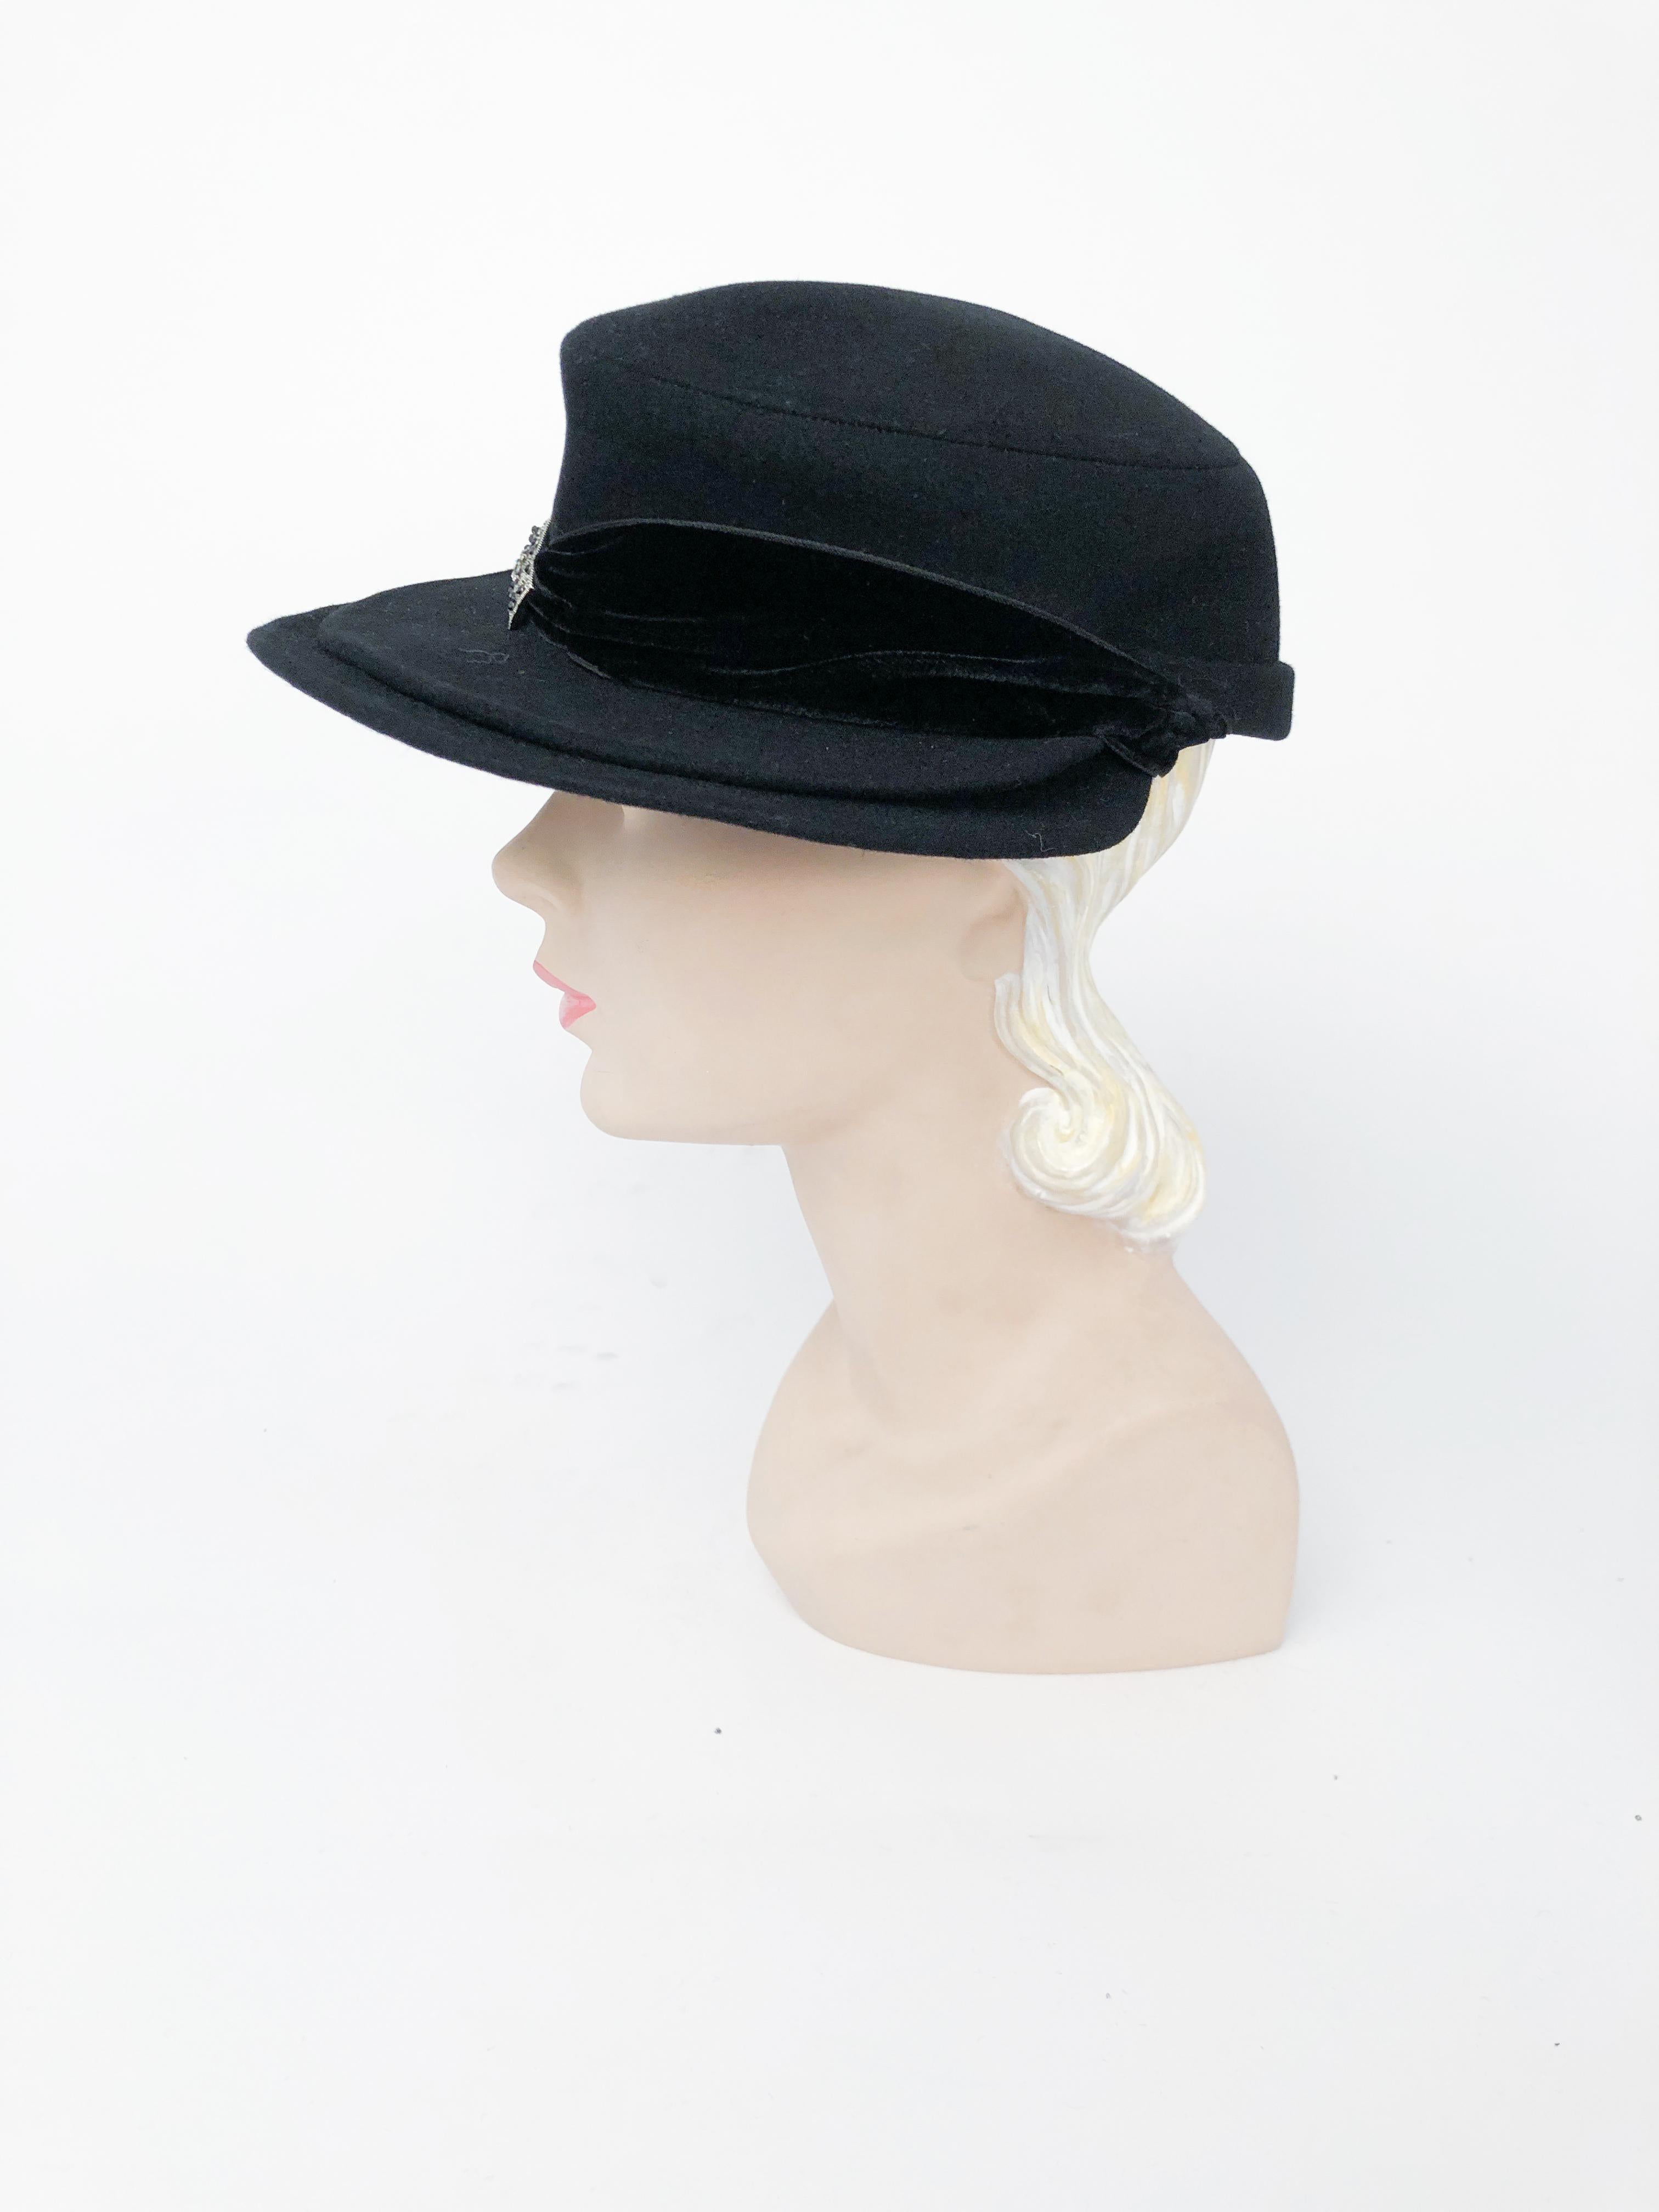 Black beaver fur felt hat with double bill, velvet band and jeweled accent.